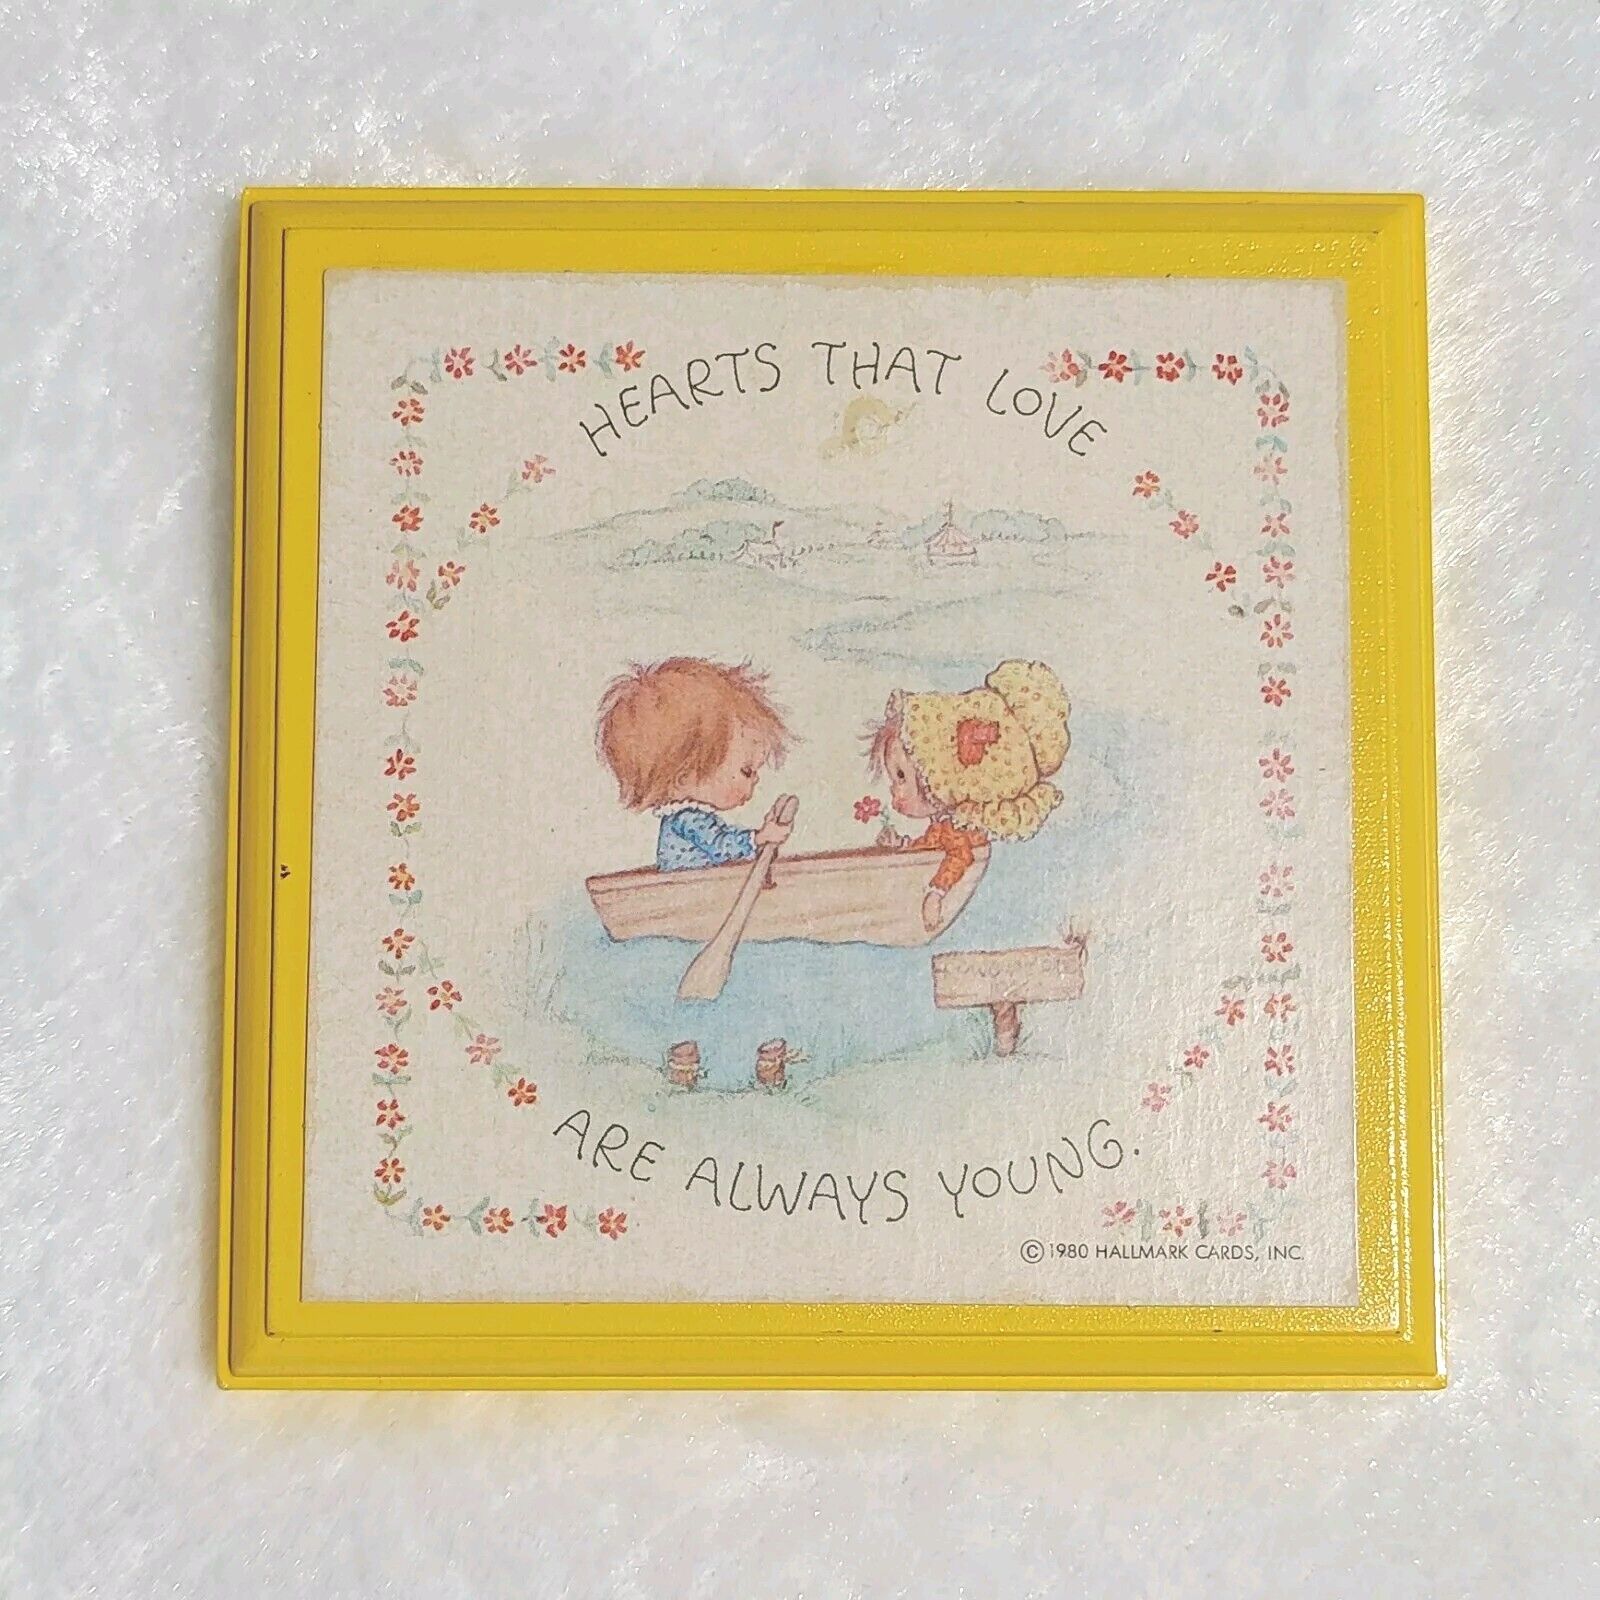 Vintage Hallmark Cards Plaque Precious Moments 1980 Hearts That Love Are Always 